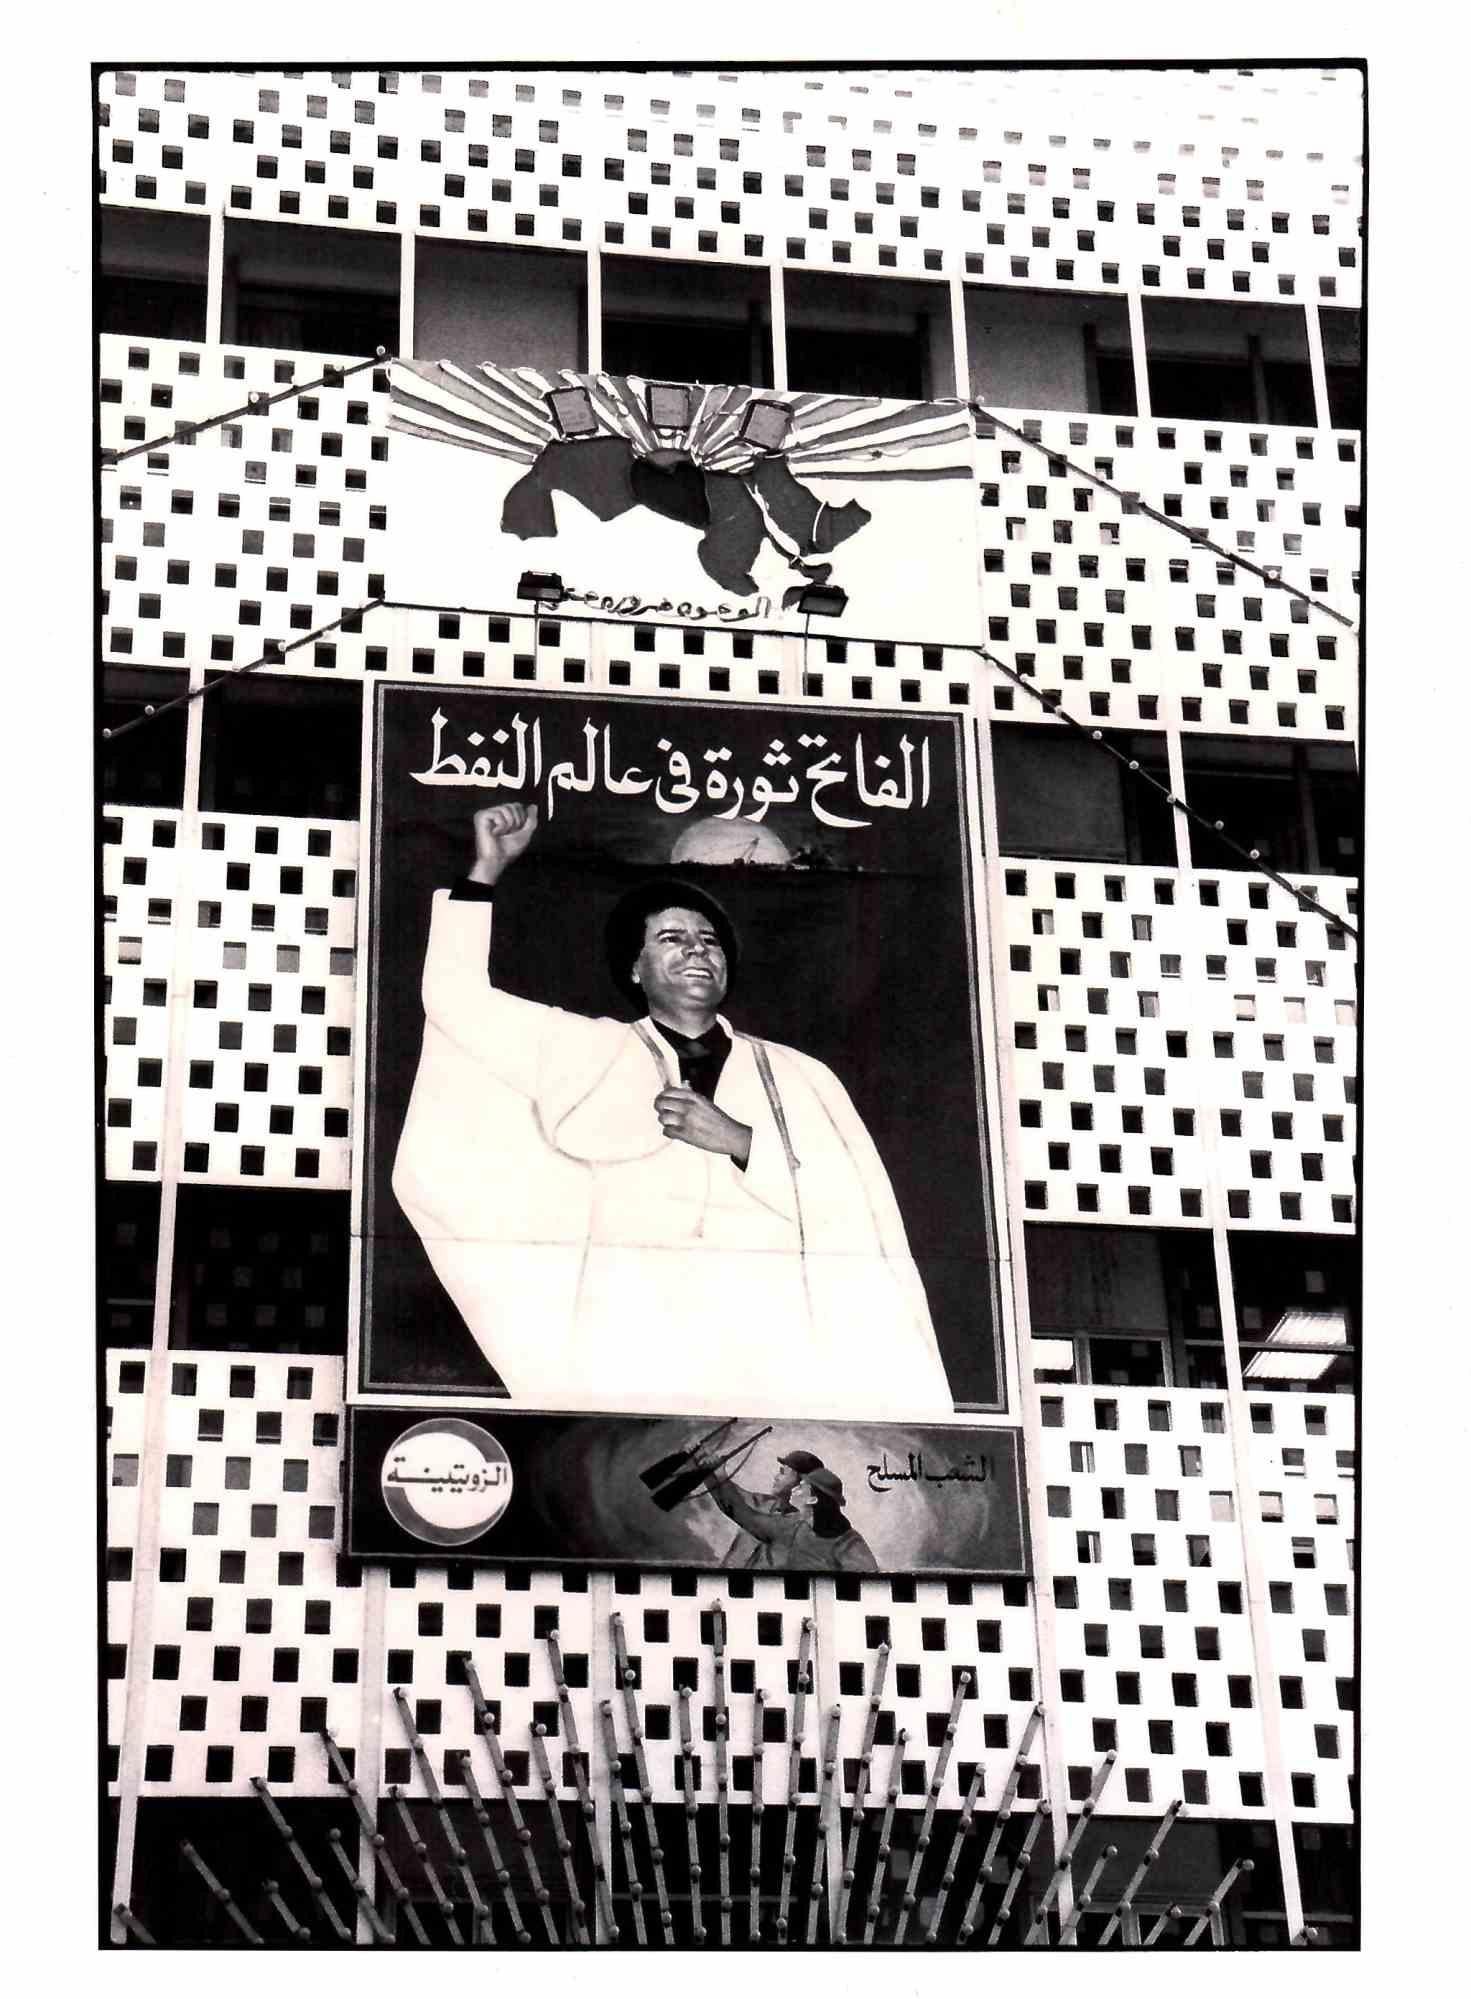 Unknown Portrait Photograph - Gaddafi Revolutionary Poster on a Building - Vintage B/W photo - Early 1970s